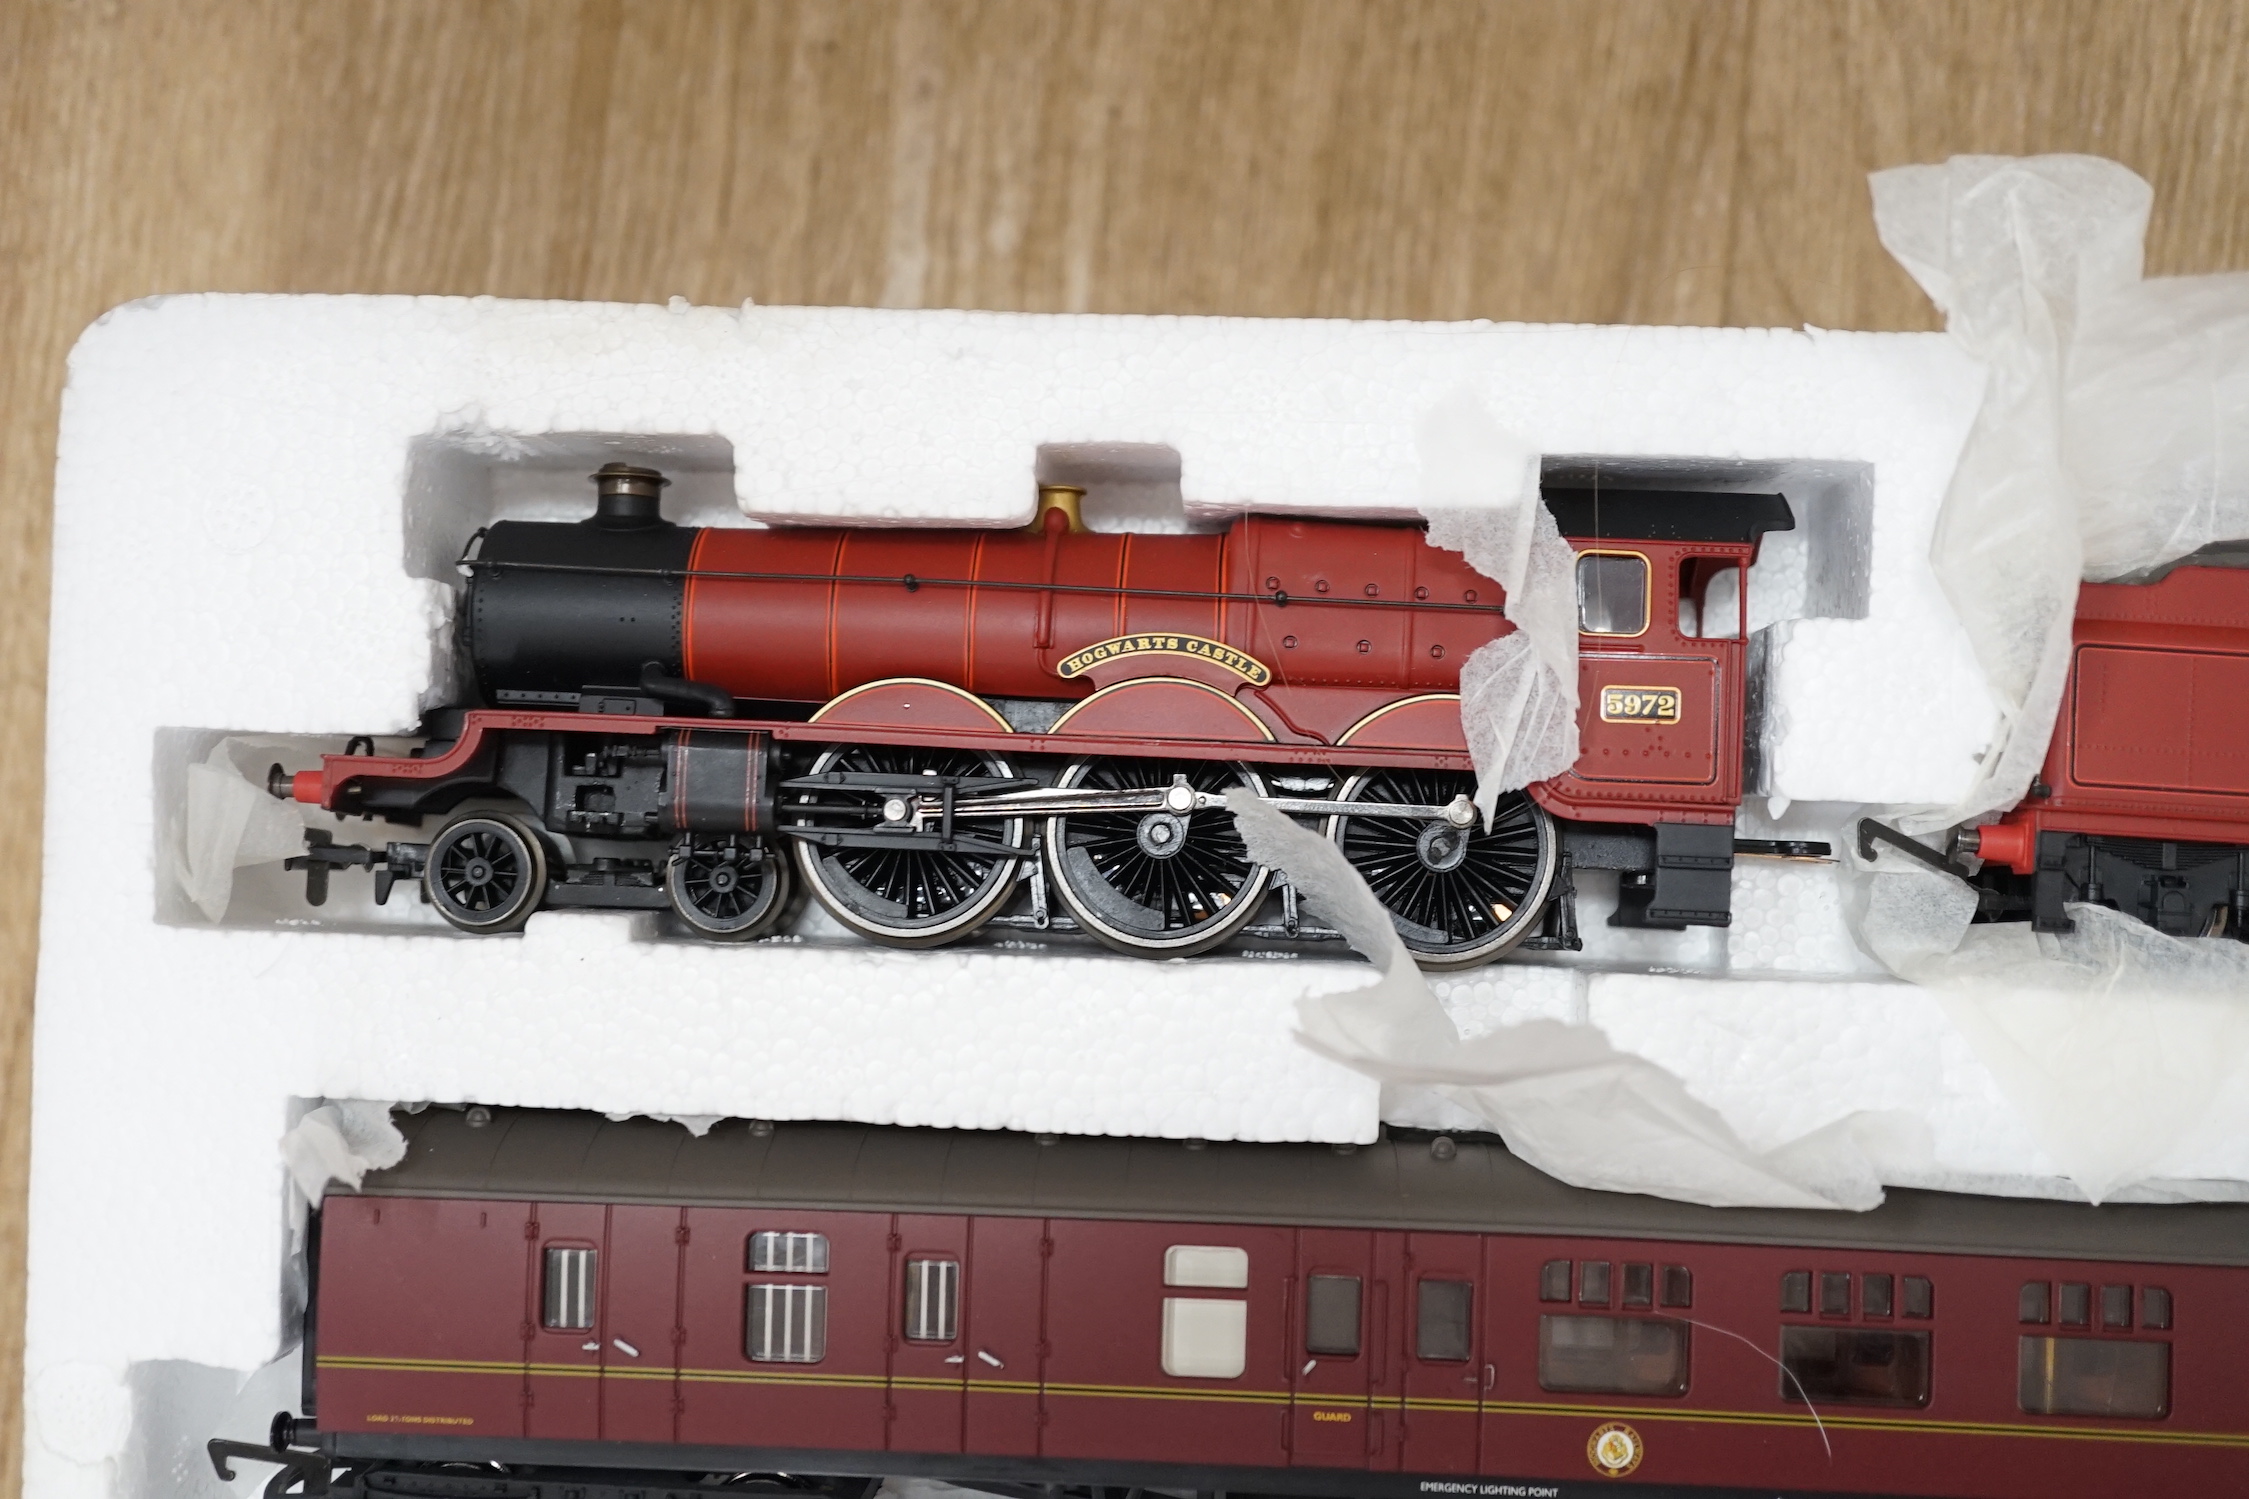 A Hornby 00 gauge Hogwarts Express Electric Train Set (R1033) from Harry Potter and the Chamber of Secrets